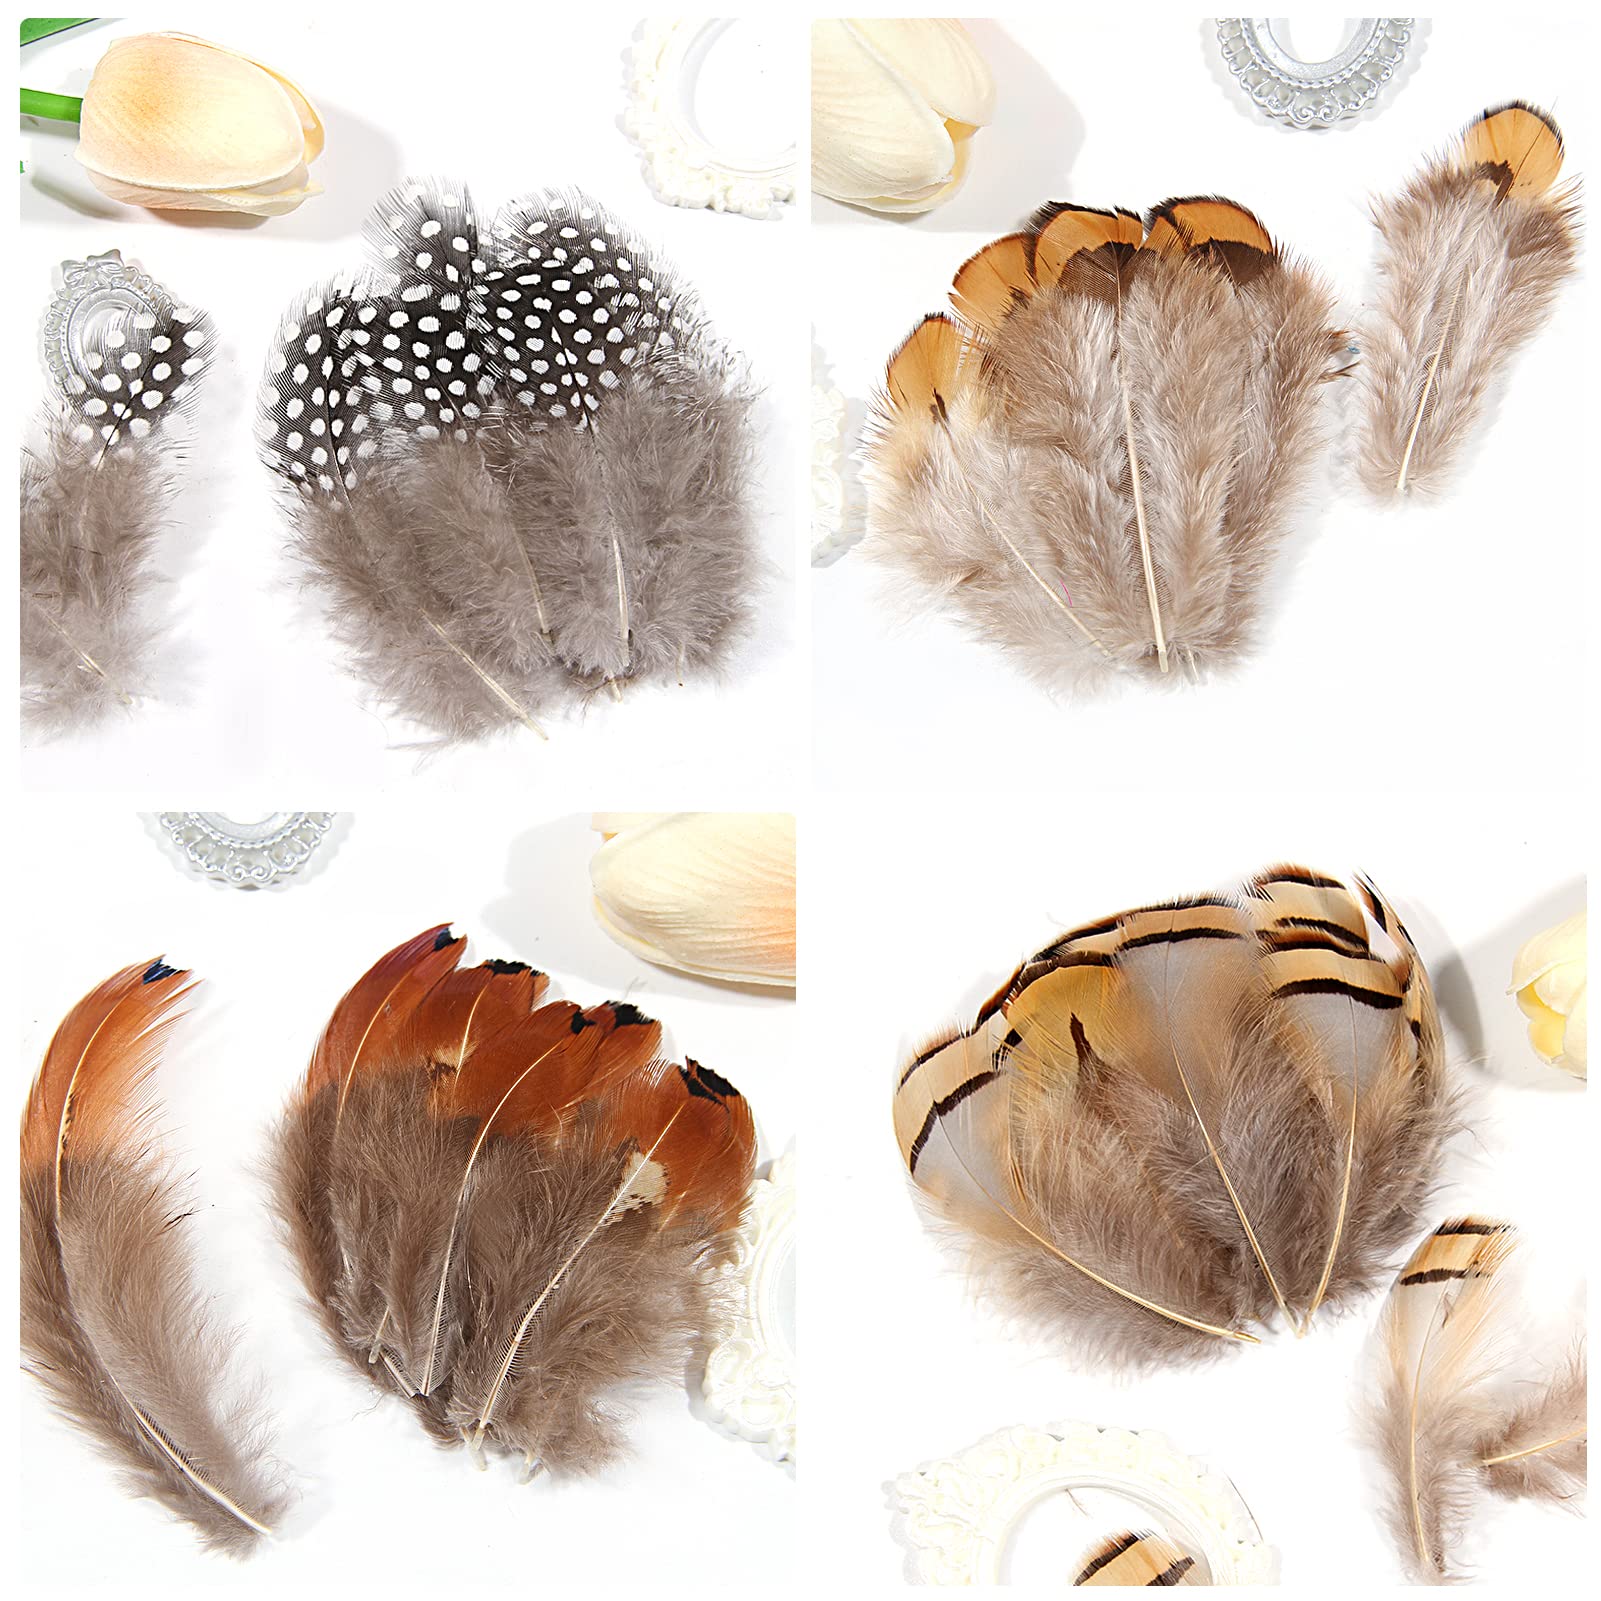 SendyFeather 200pcs 10 Style Natural Feathers Assorted Mixed Feathers for Dream Catcher Crafts DIY Decoration